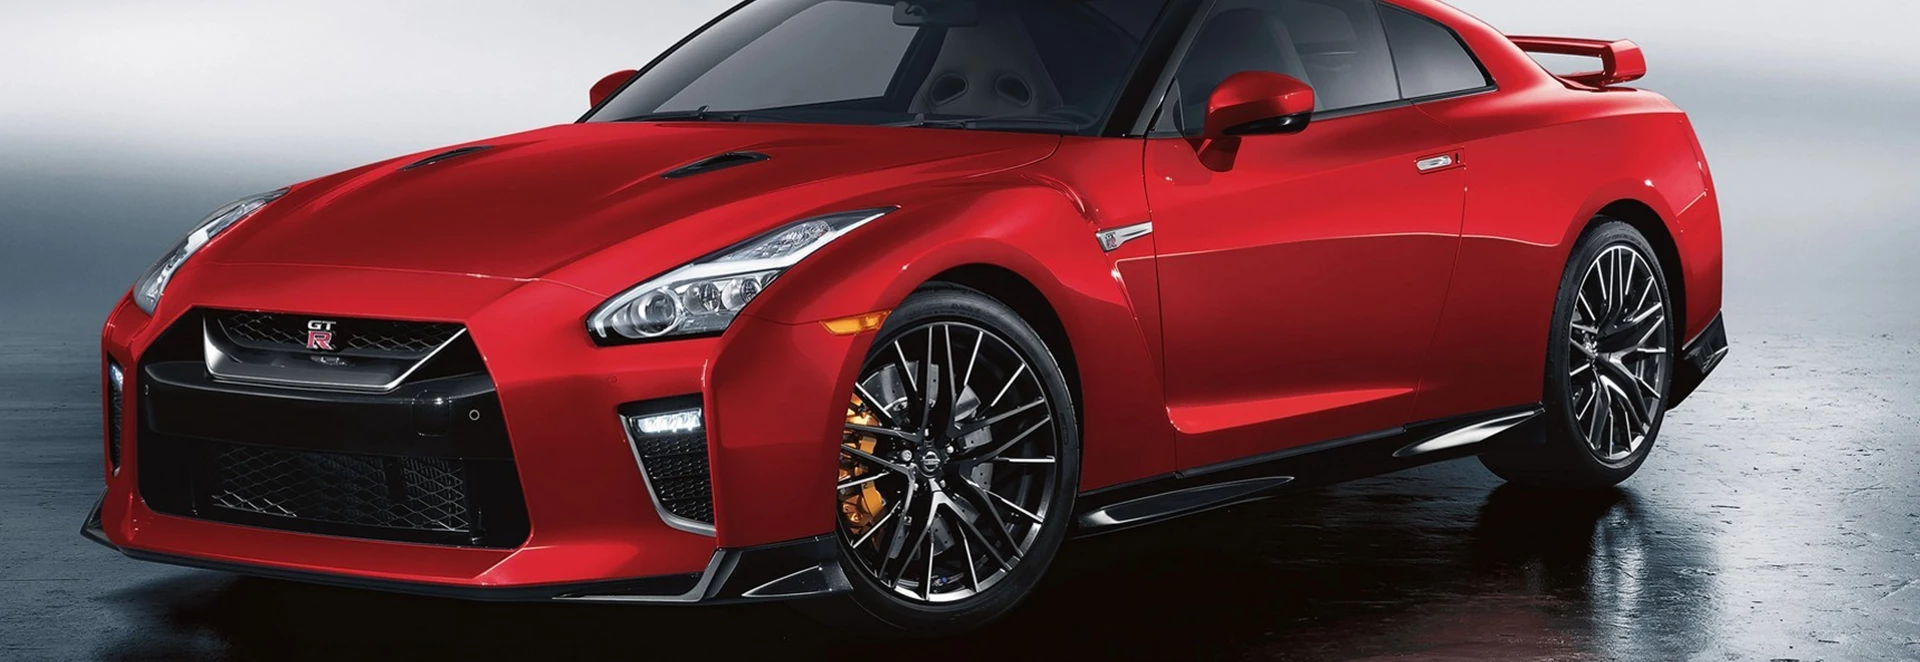 Upgraded MY2020 Nissan GT-R is now available to order